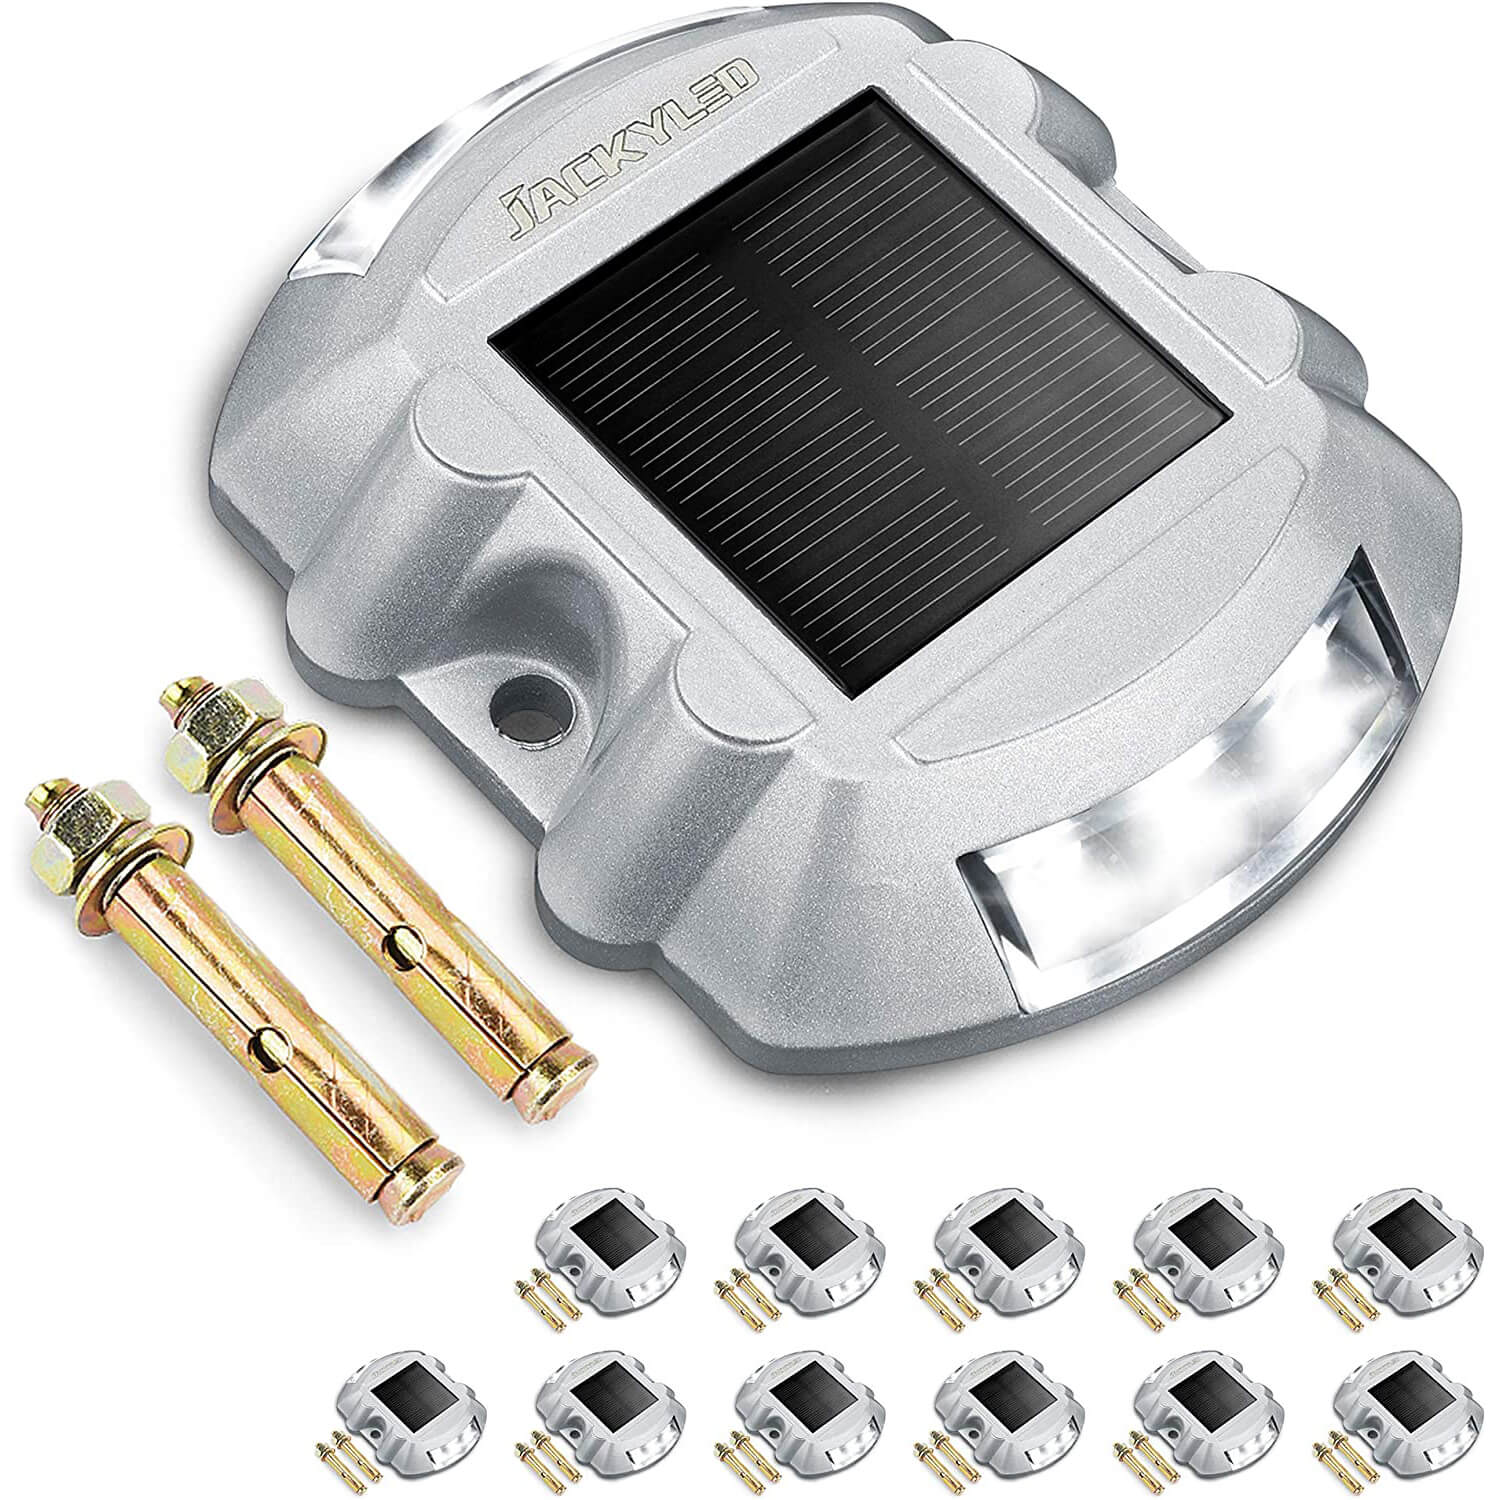 JACKYLED Solar Powered Driveway Lights (12 Pack)